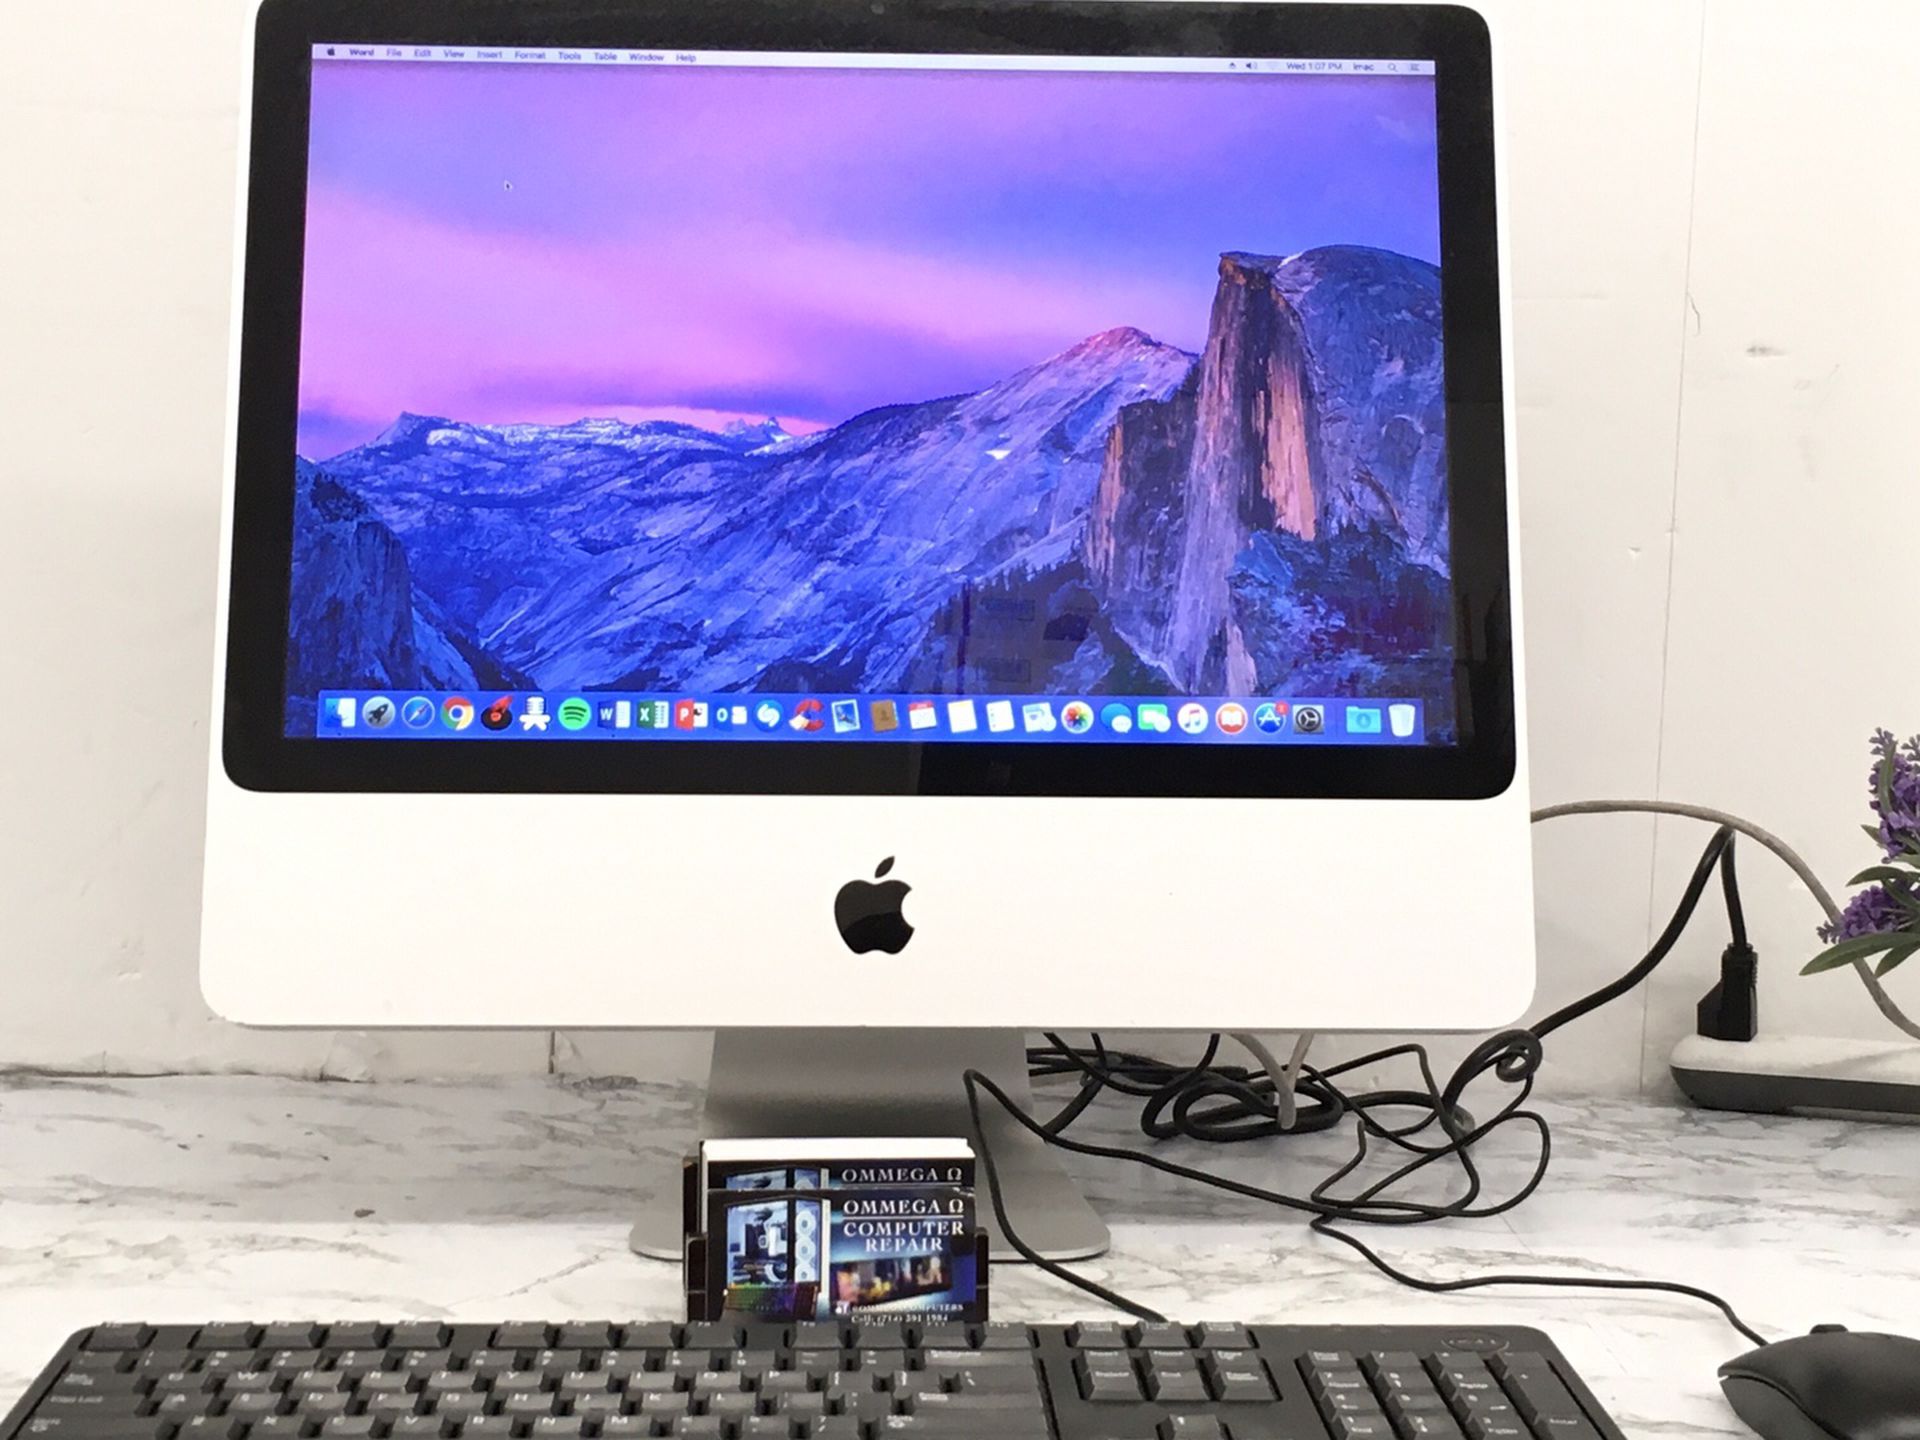 **Apple iMac 20" Early 2009 with Zoom and Microsoft Office ** *Mac OS X El Capitan 10.11.6 ** Price $ 165 ** *Intel Core 2 Duo @ 2.0ghz. *3 GB ram.